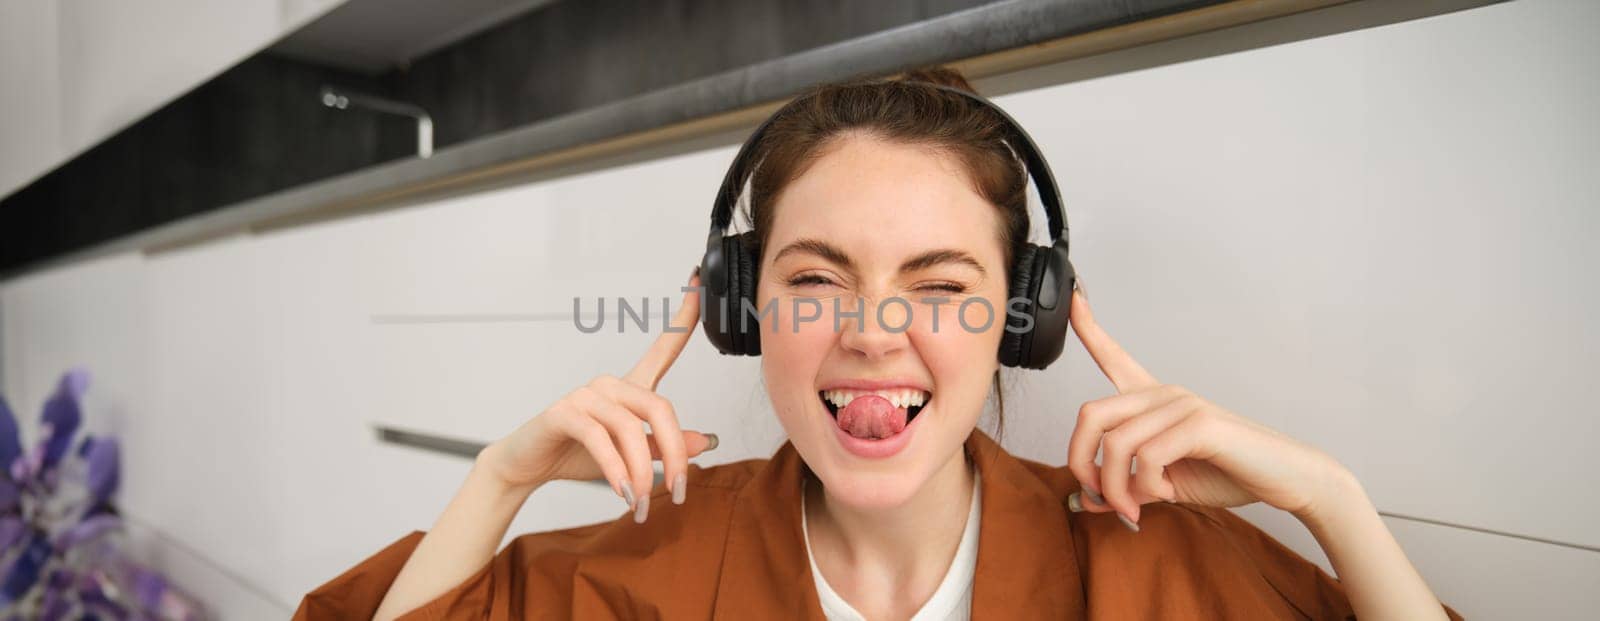 Cute young woman, makes funny faces, listens to music, wears wireless headphones, having fun at home.